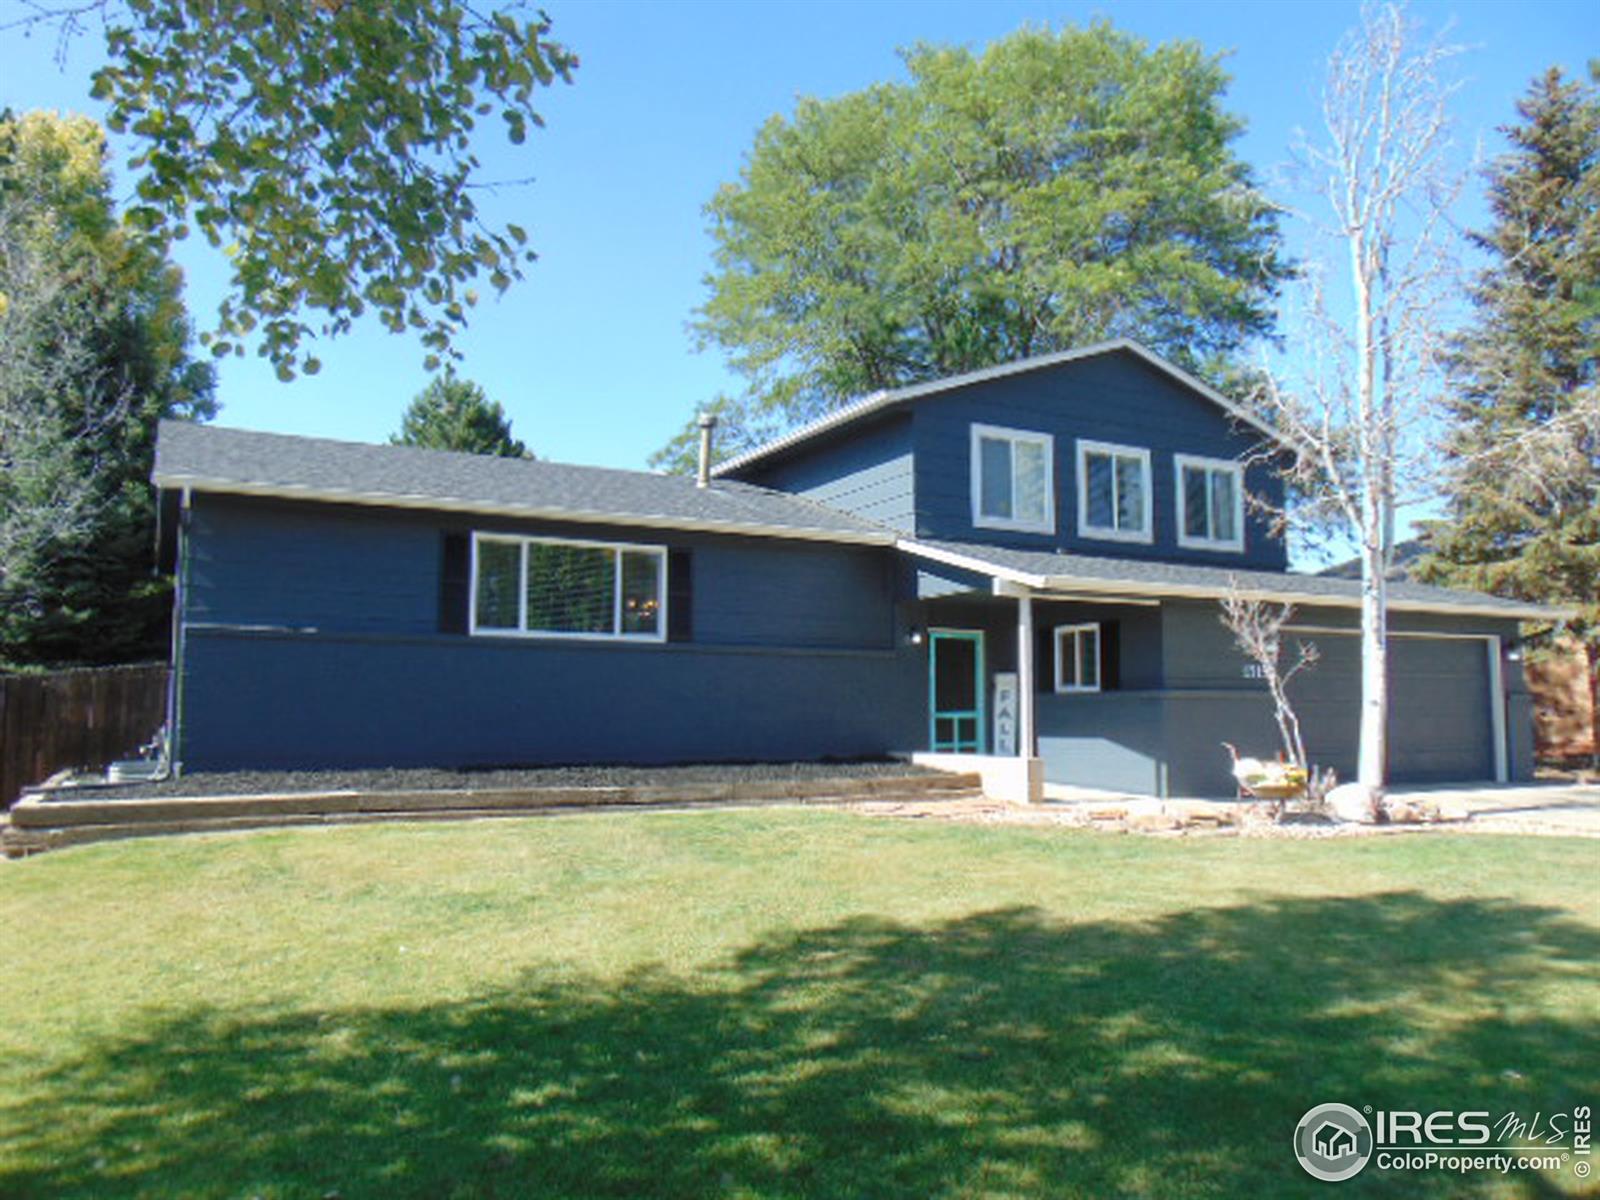 1715 57th, Greeley, CO